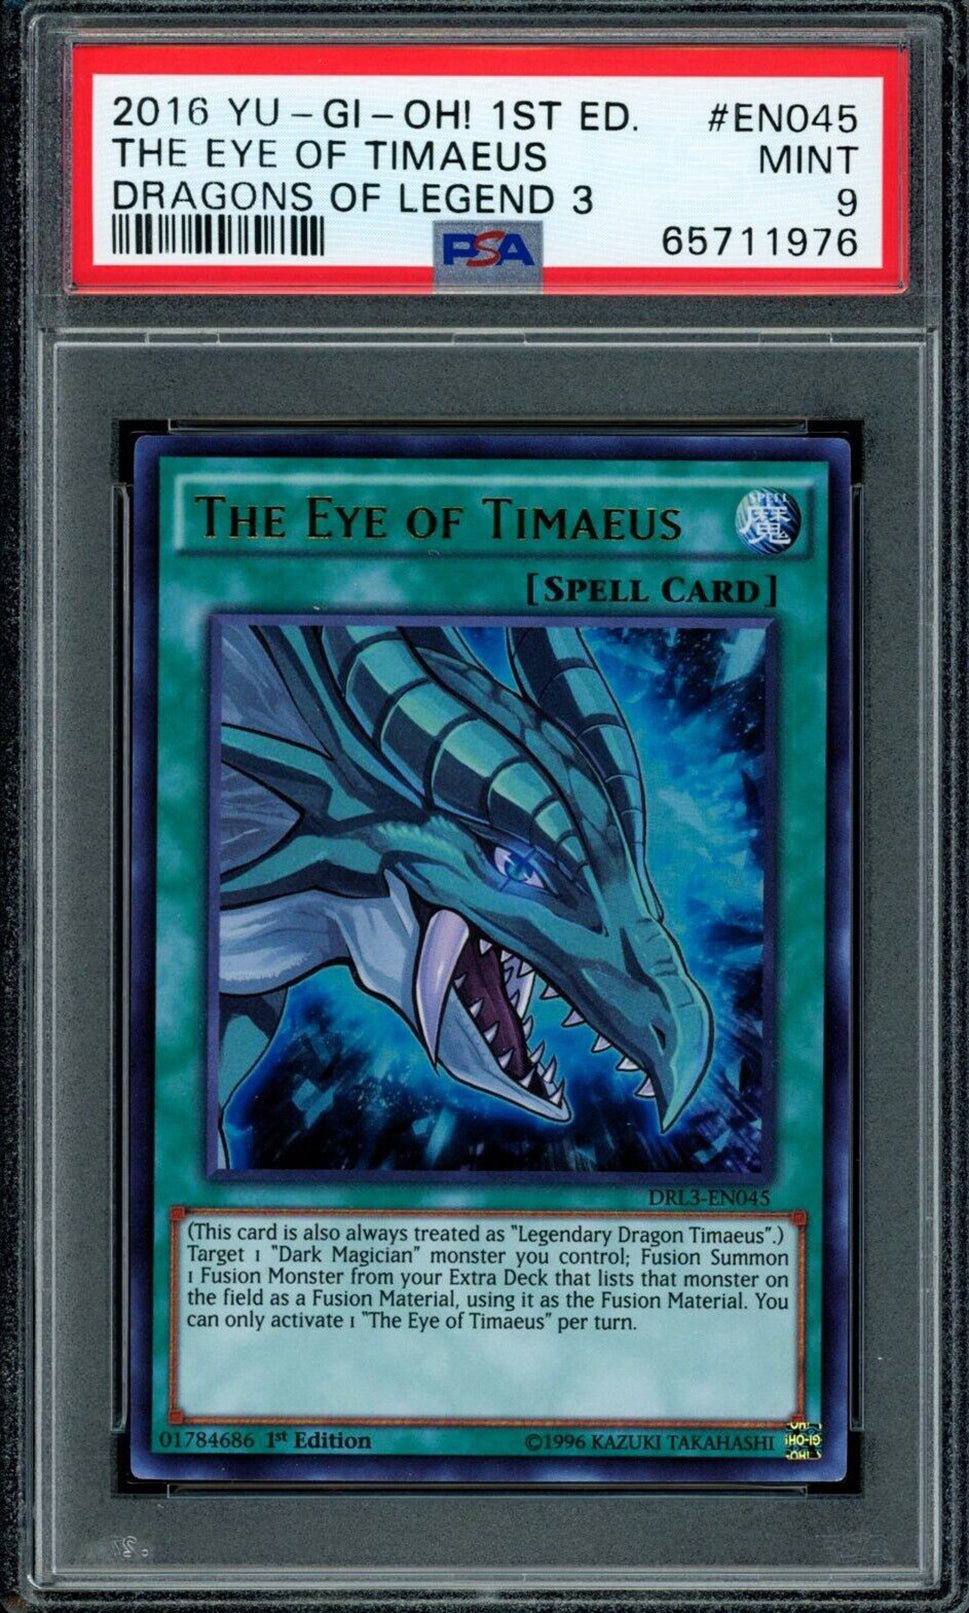 THE EYE OF TIMAEUS DRL3-EN045 Ultra Rare PSA 9 2016 Dragons of Legend 3 1st Edition C2 Yu-Gi-Oh Base Graded Cards - Hobby Gems